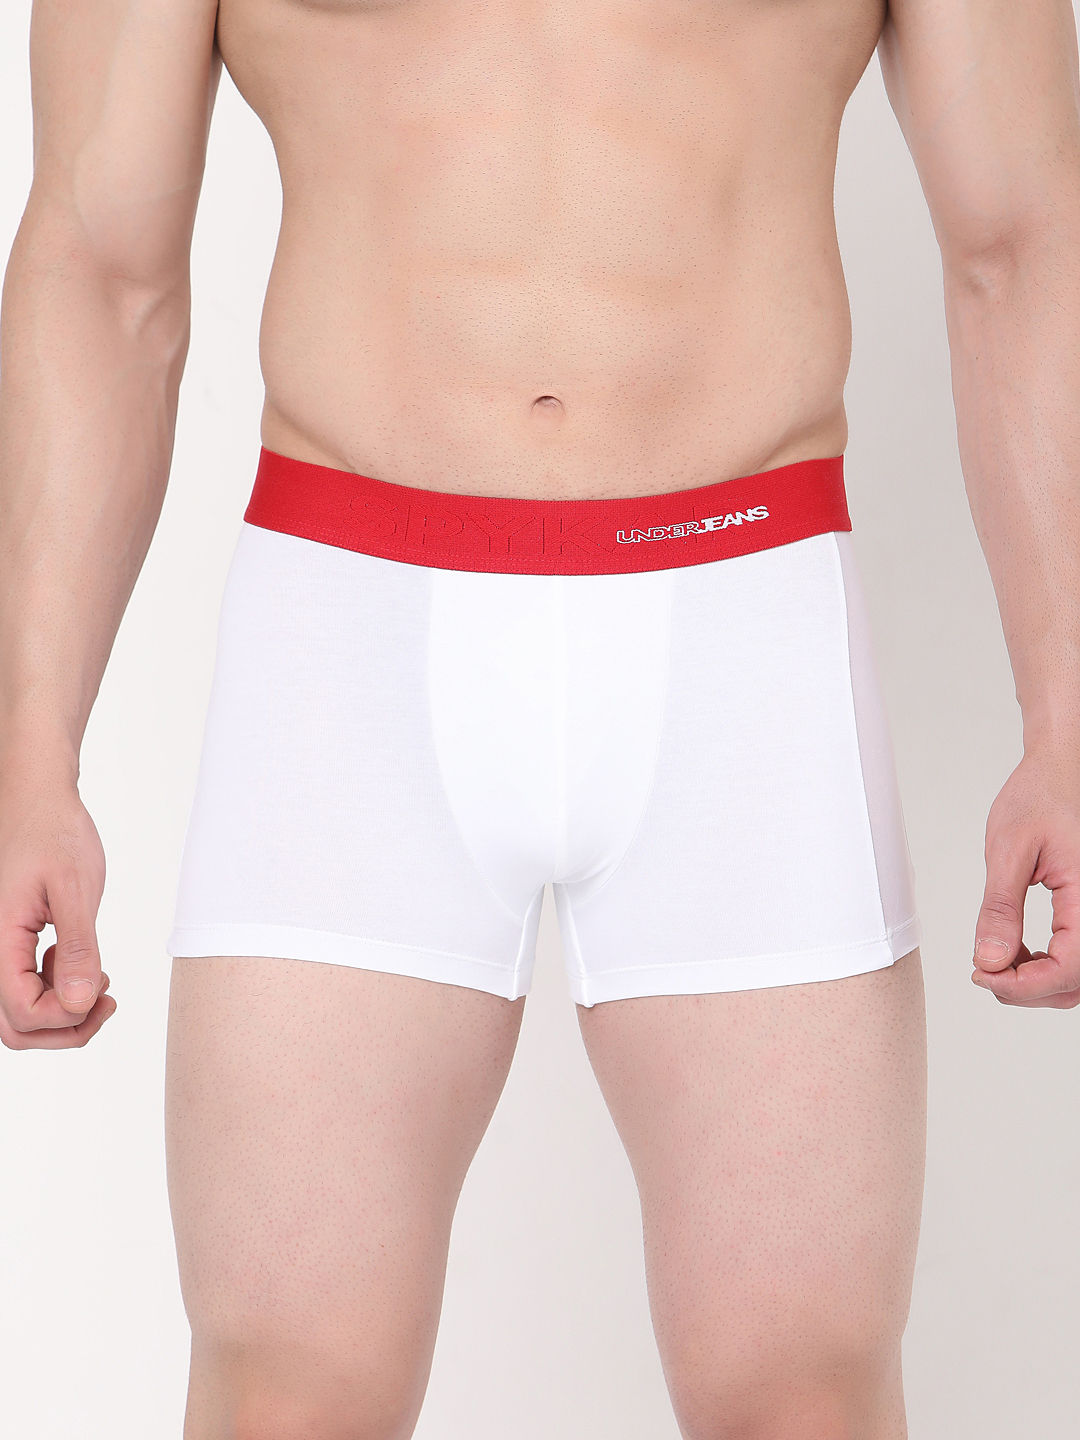 Underjeans by Spykar Mens Solid Trunk - White (L)